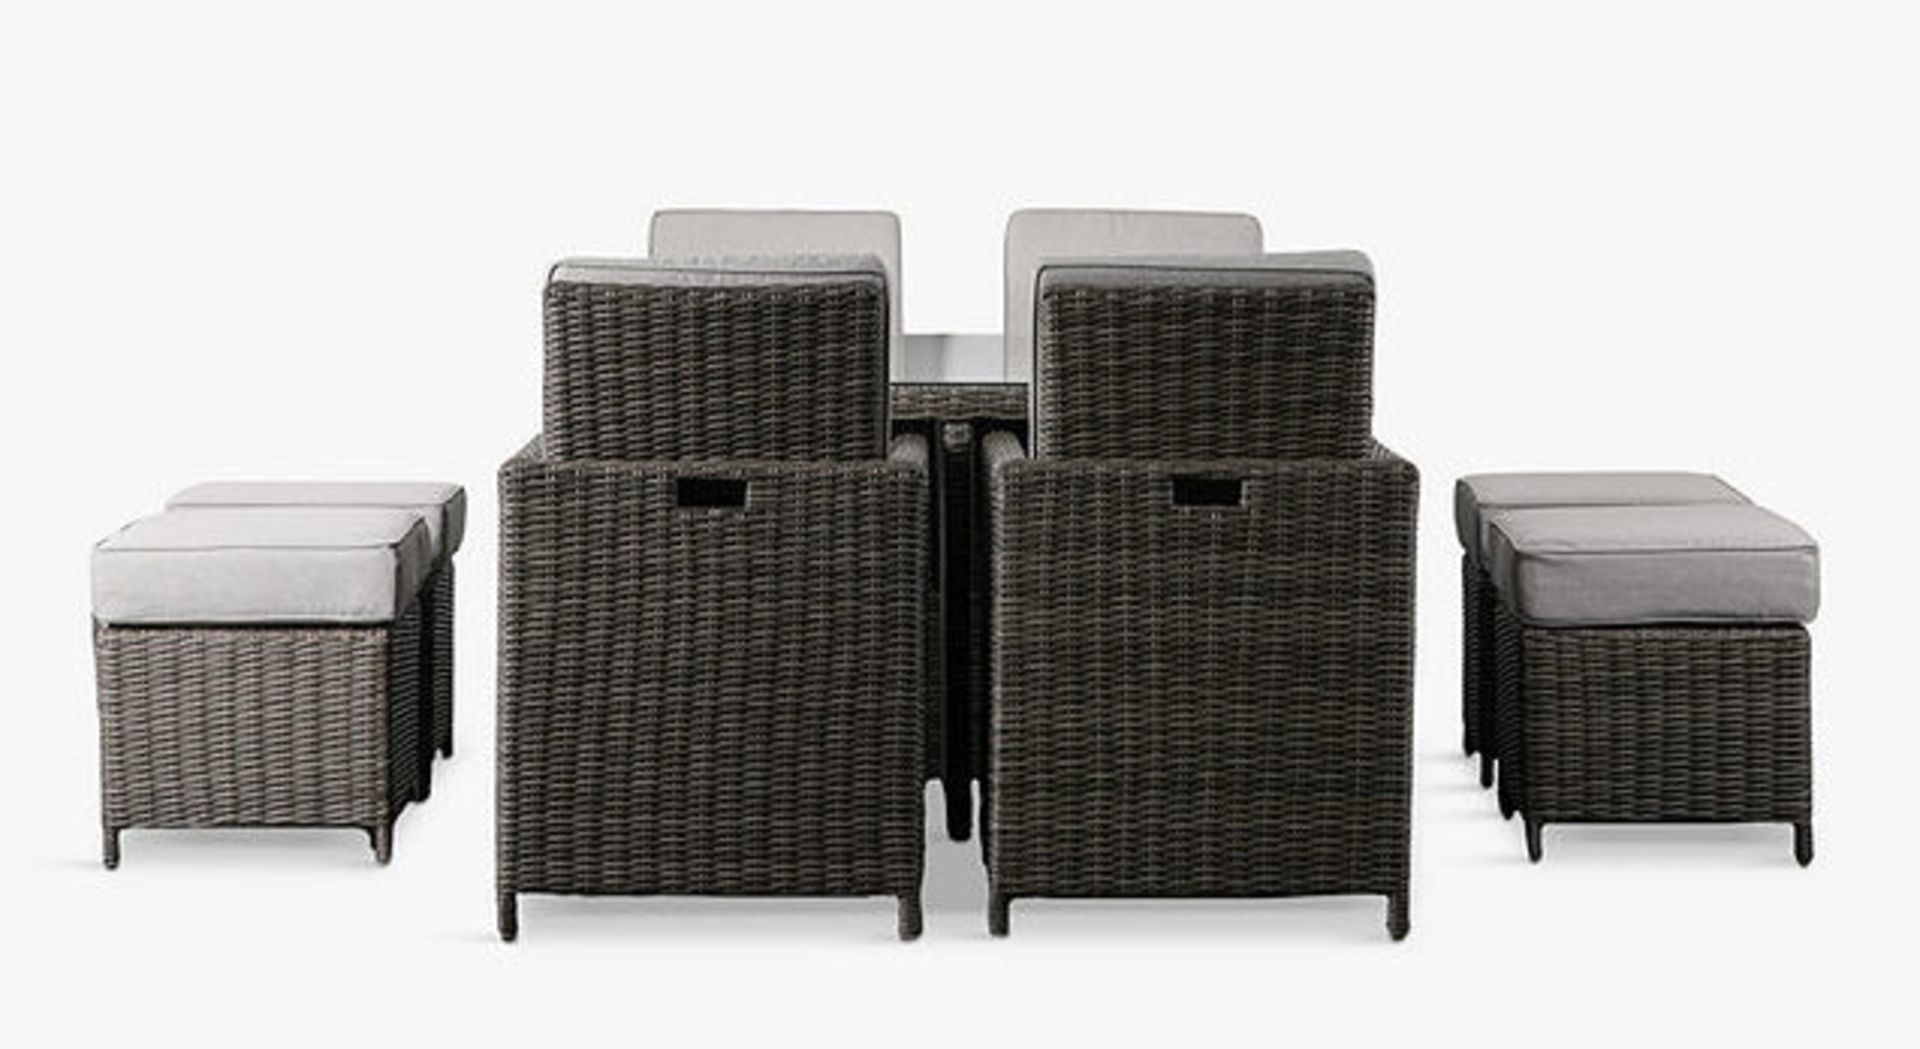 John Lewis Adford 8-Seater Height Adjust Cube Garden Dining Table & Chairs Set, Grey - PRICED £2,200 - Image 3 of 3